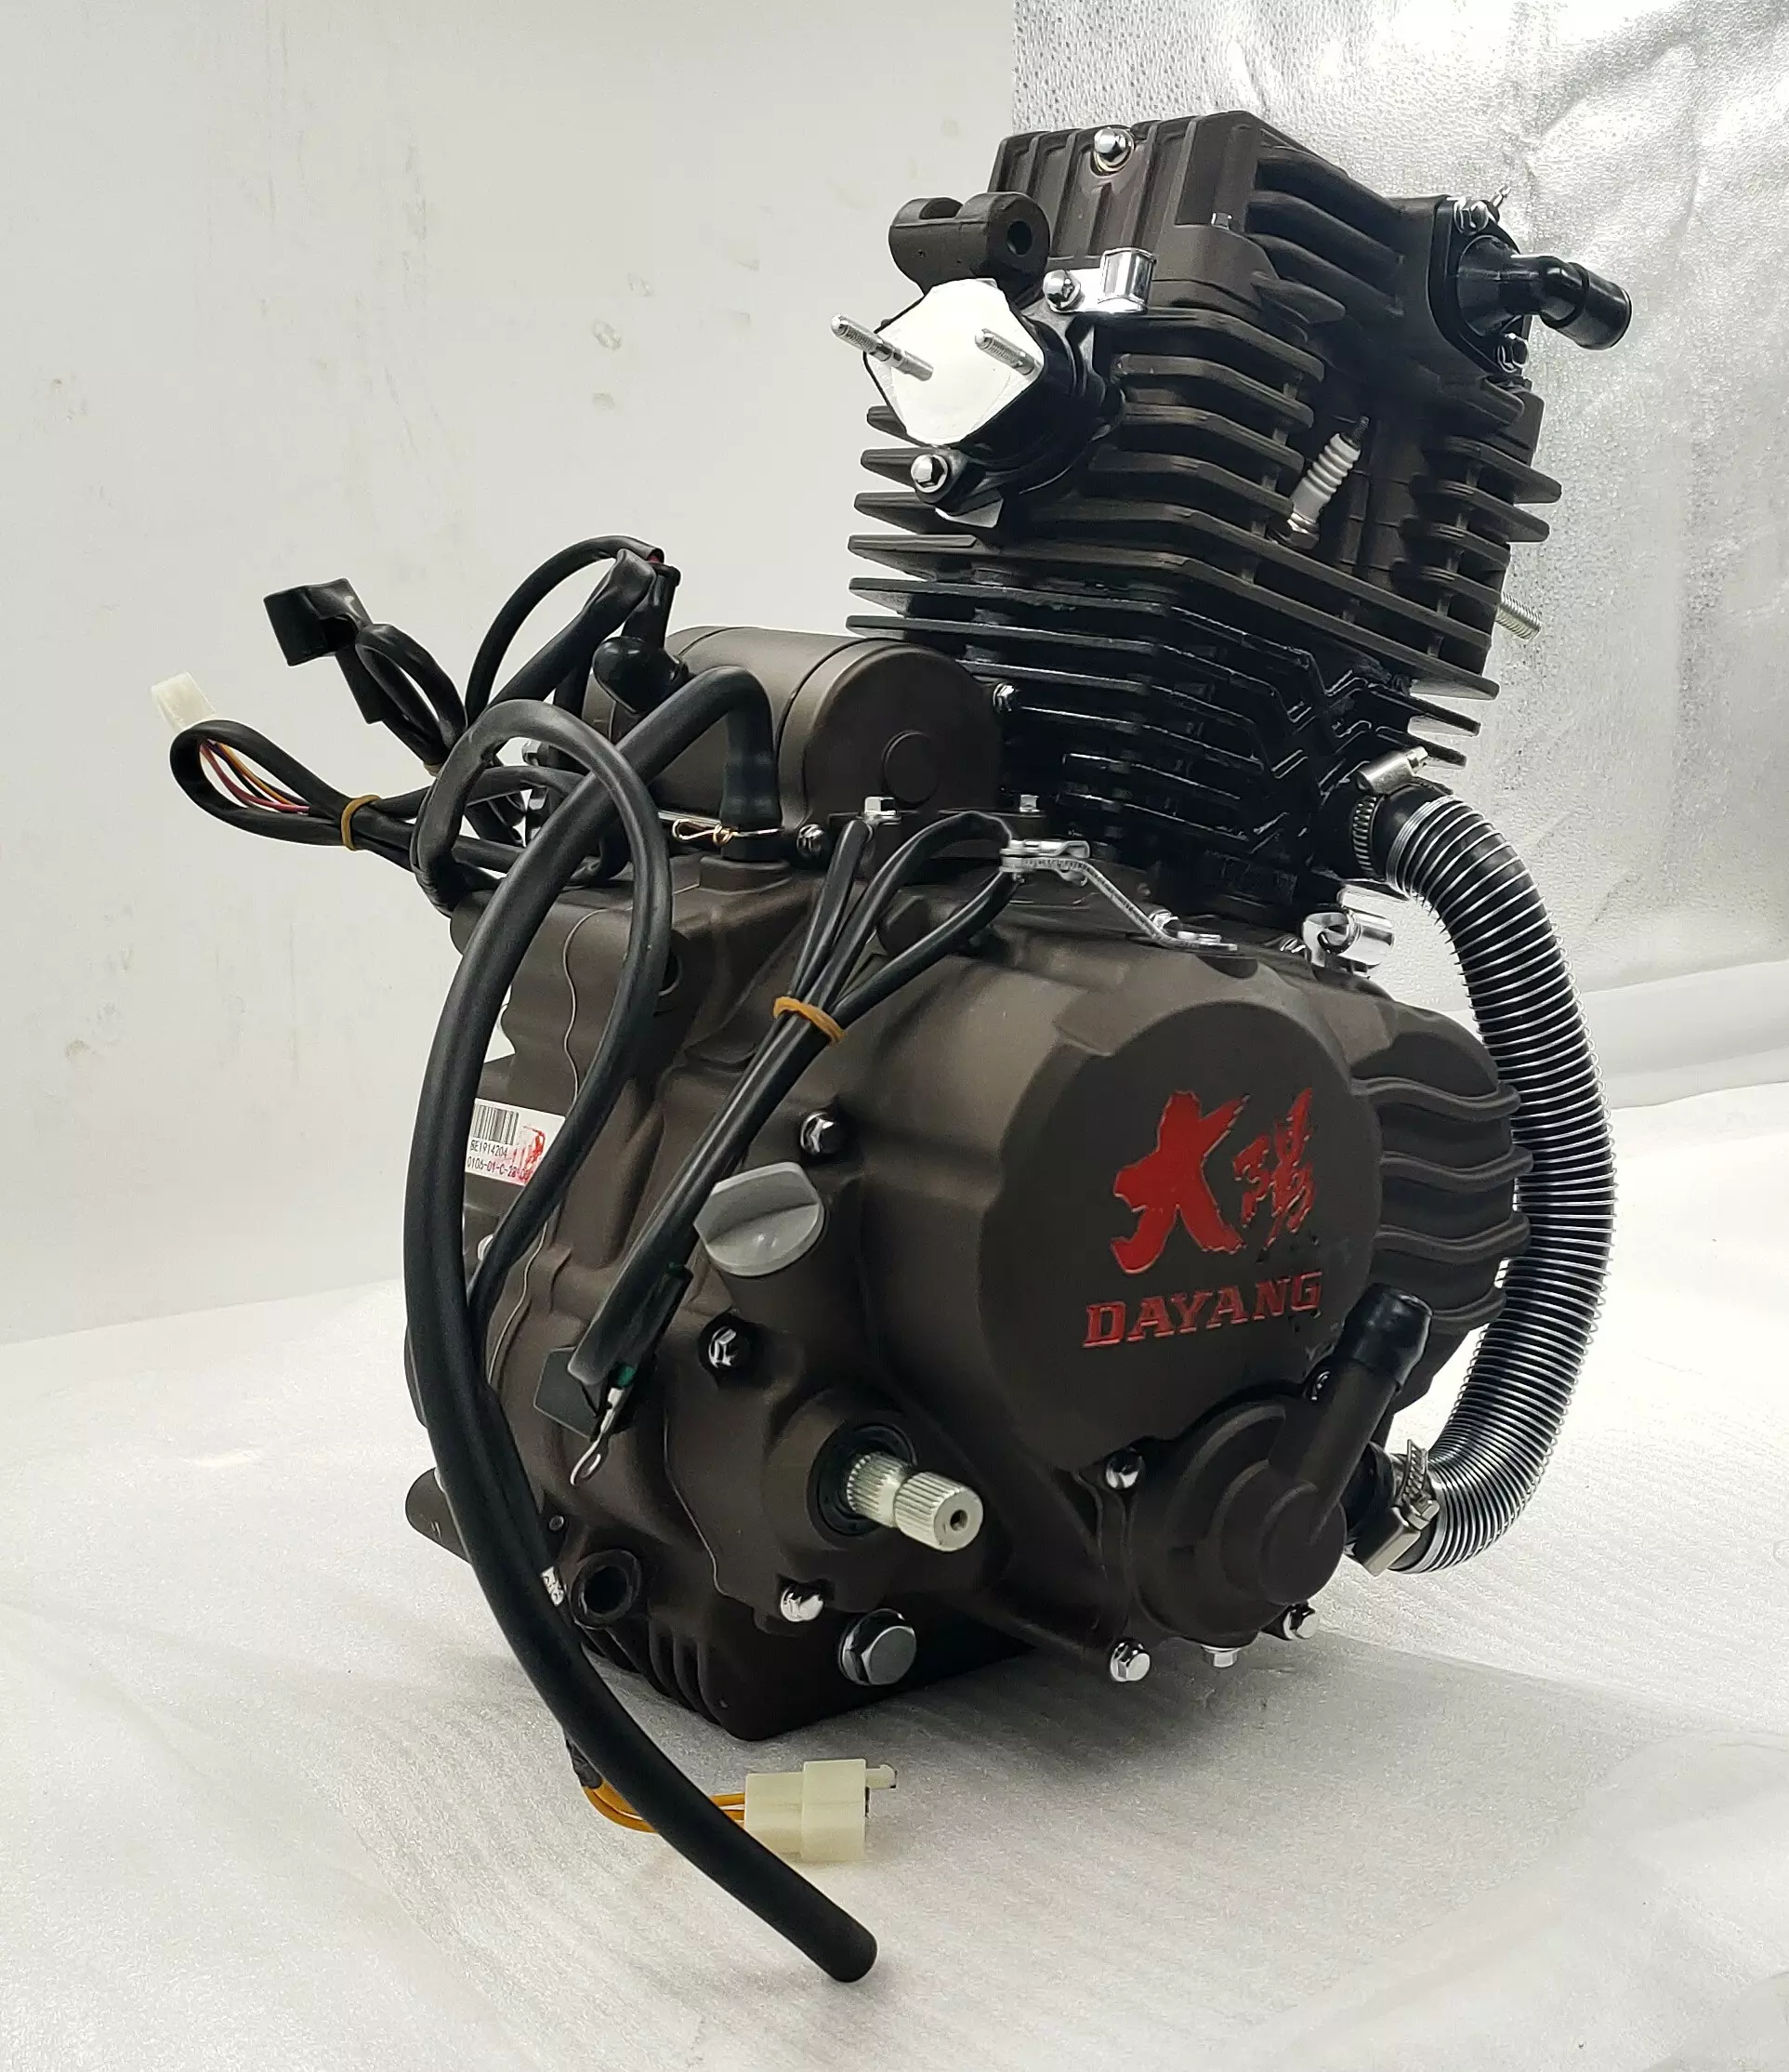 DAYANG LIFAN Wolf 200cc Engine Single Cylinder Style Electric/Kick Method Origin Type High Quality made in China CCC